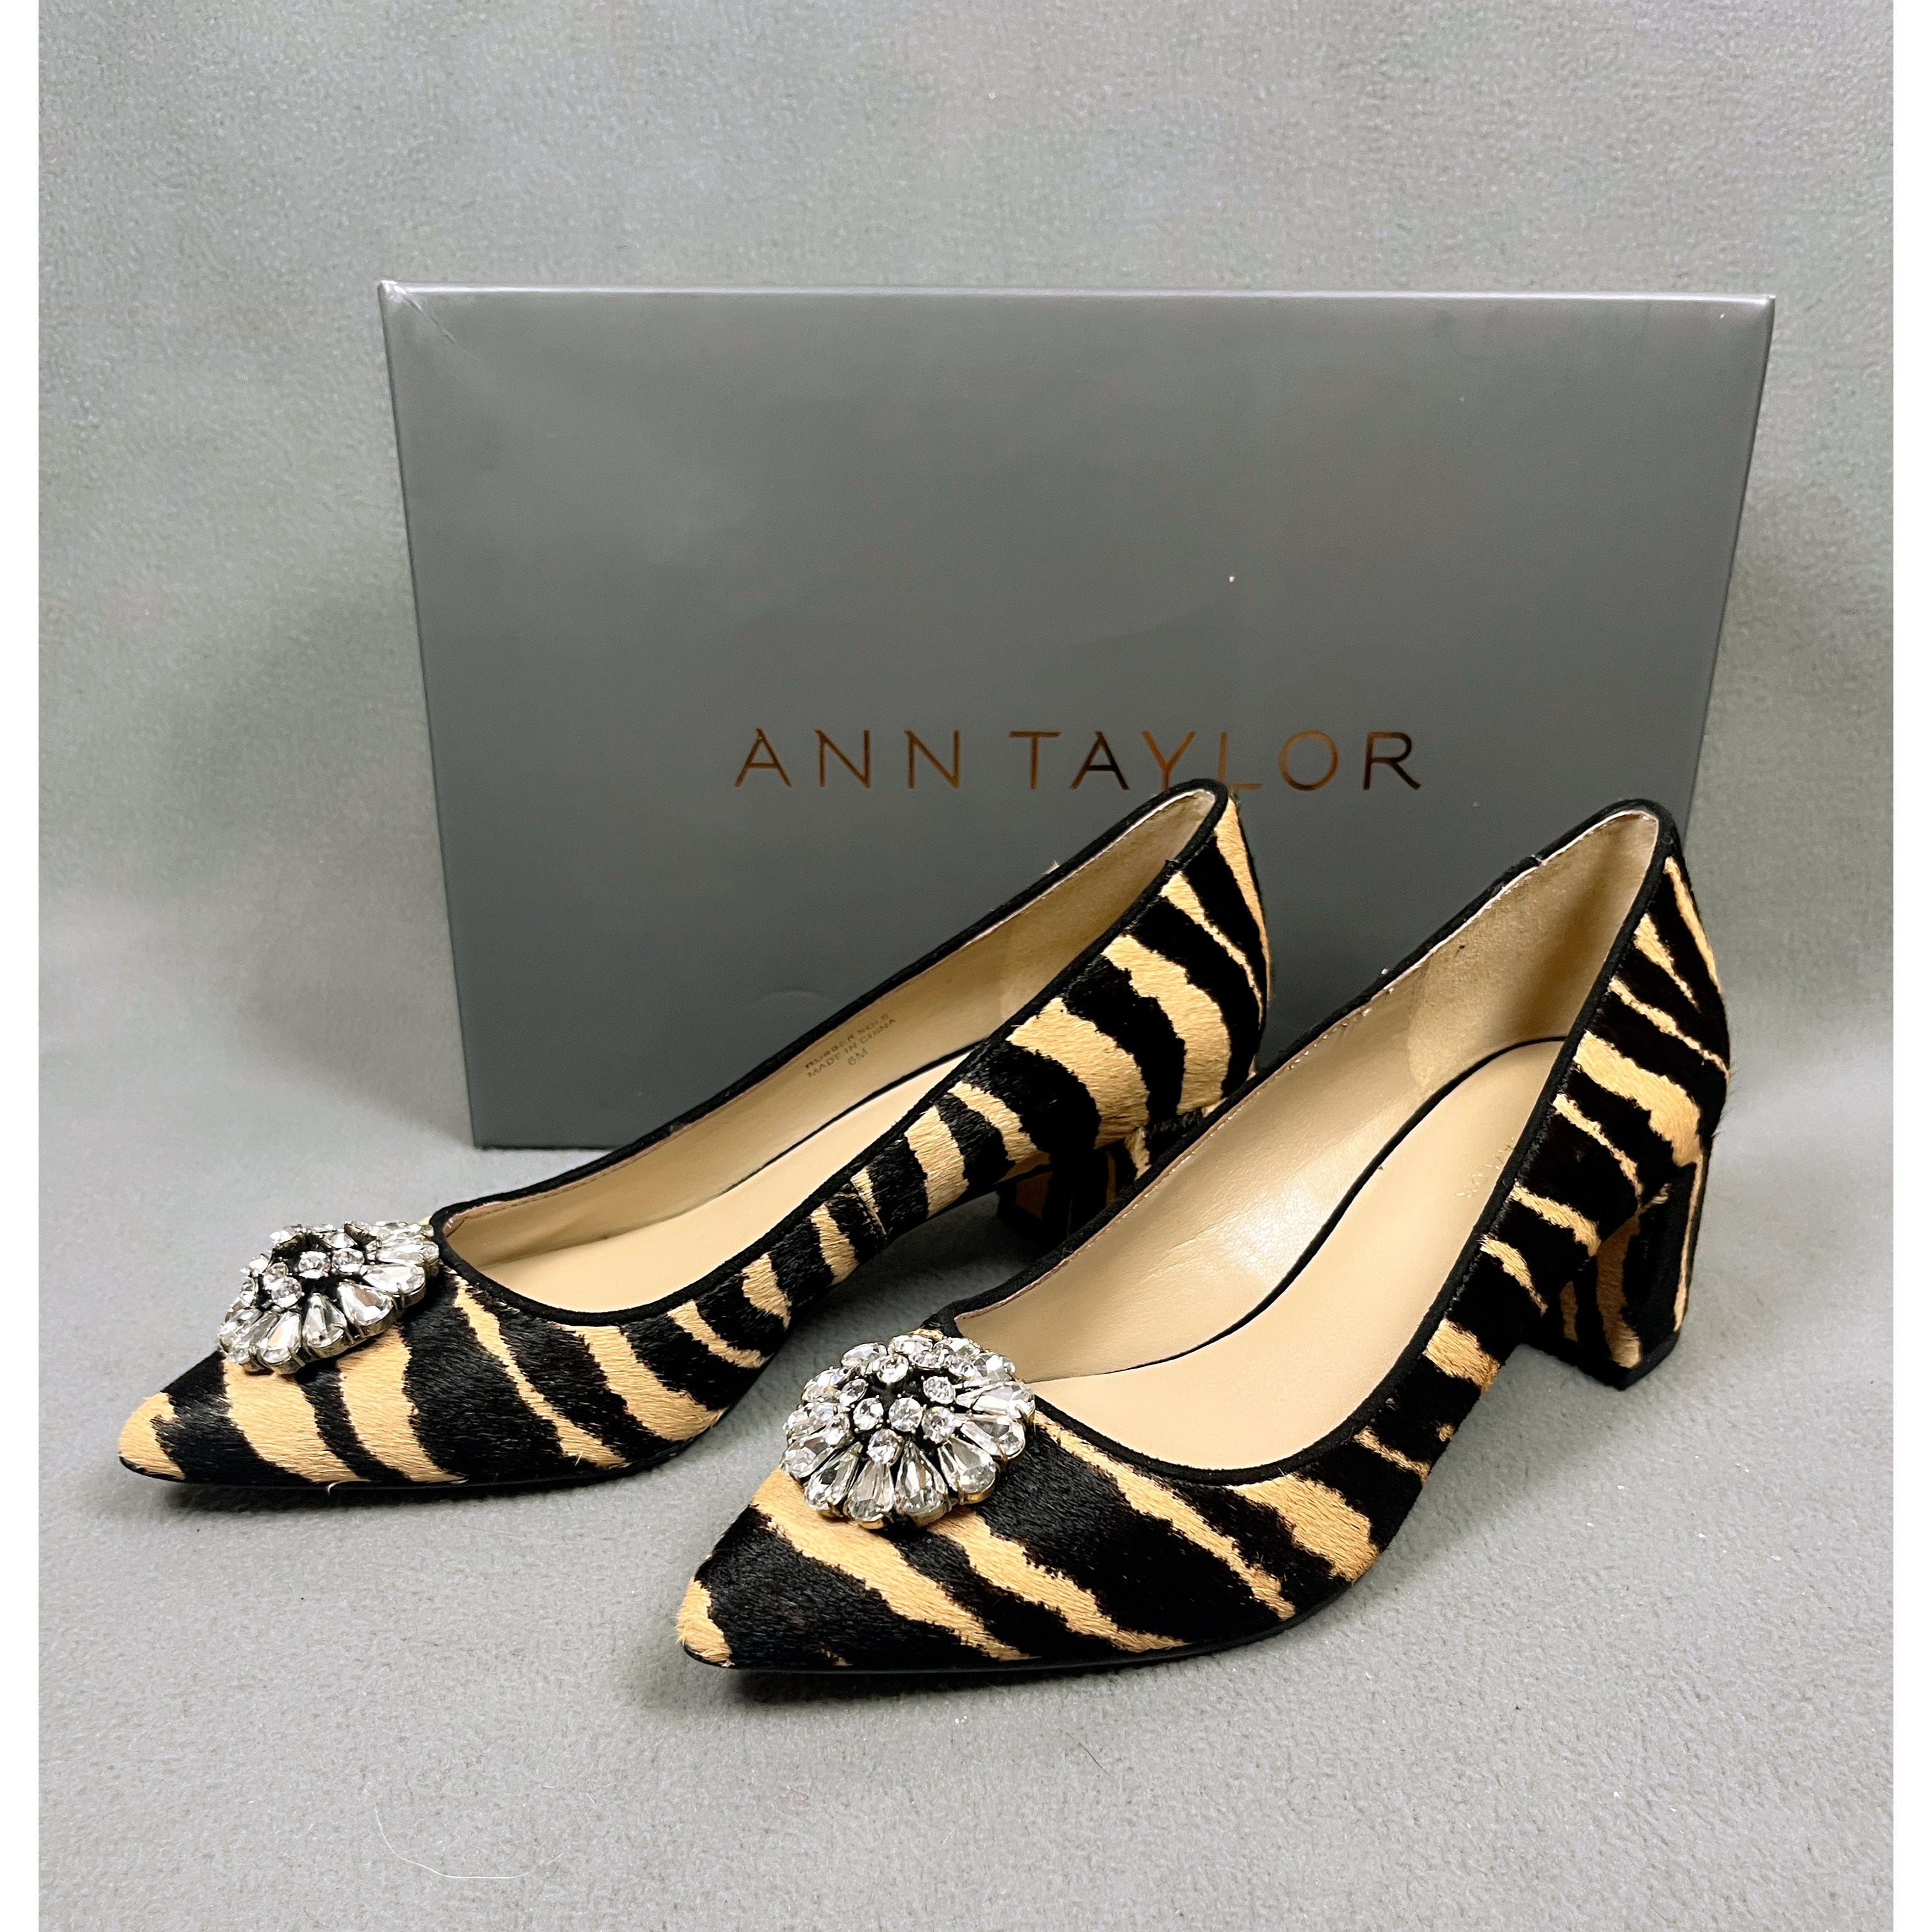 Ann Taylor animal print shoes, size 6, NEW IN BOX!